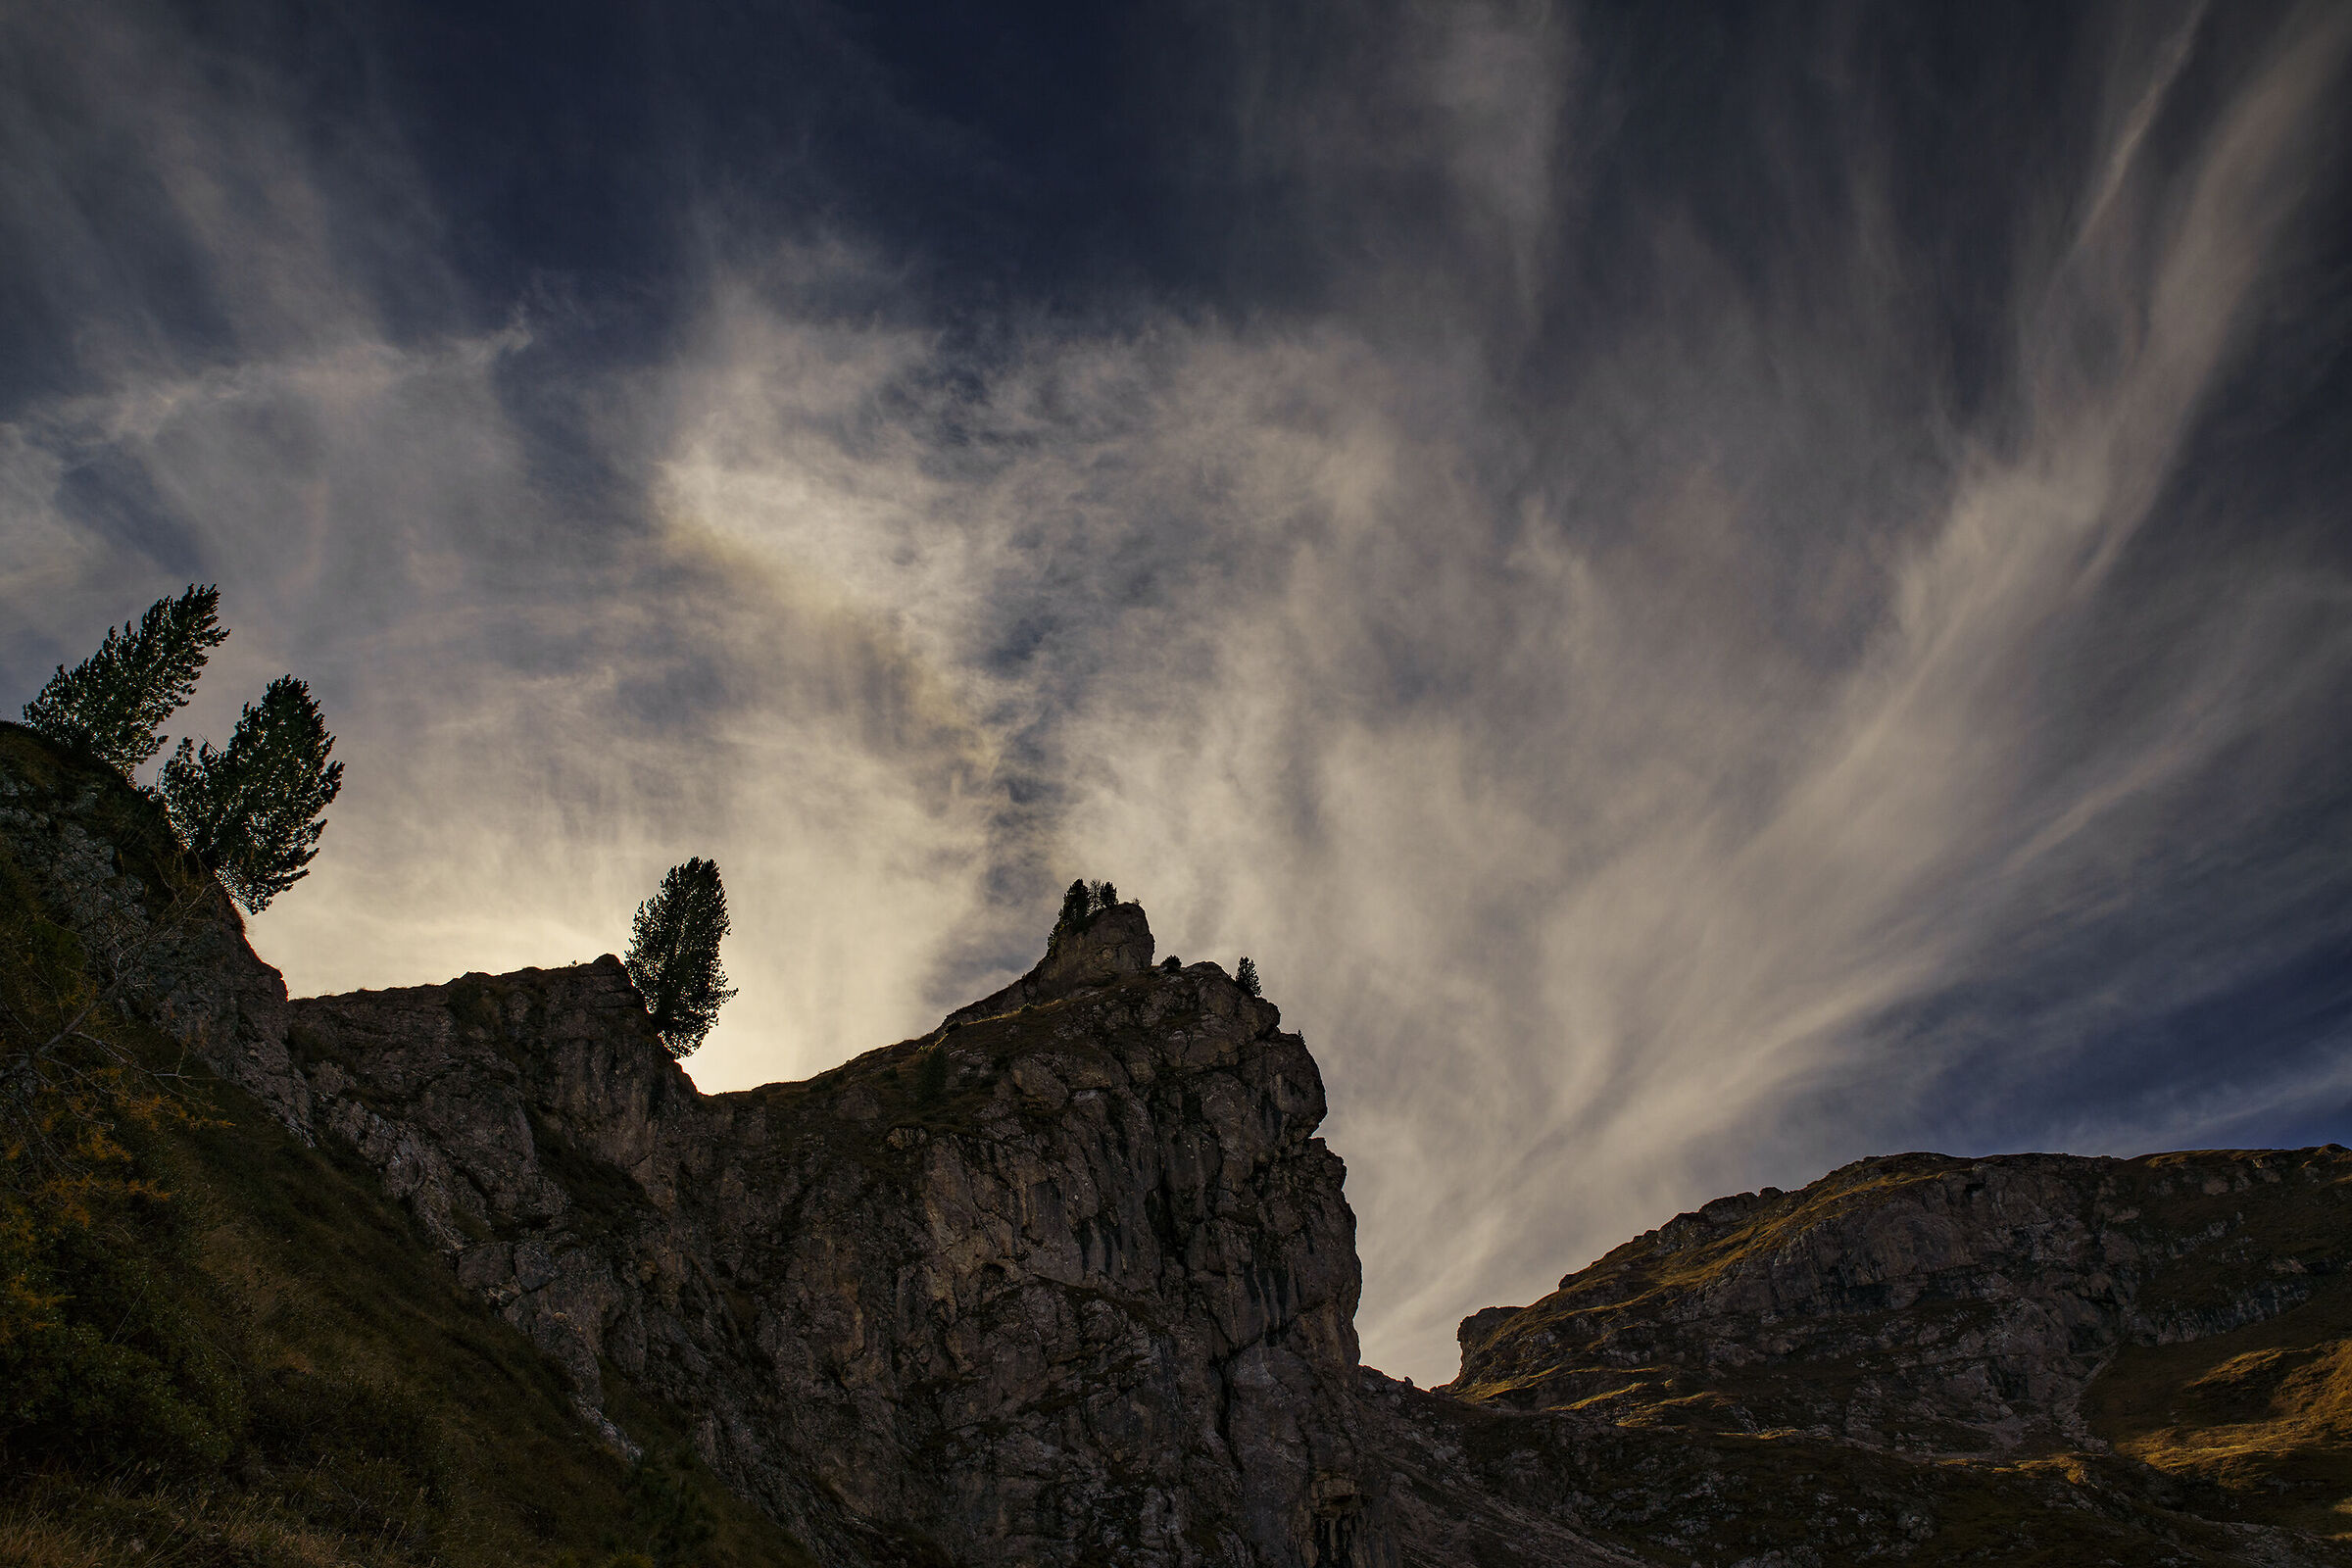 Cloud games in the Dolomites...